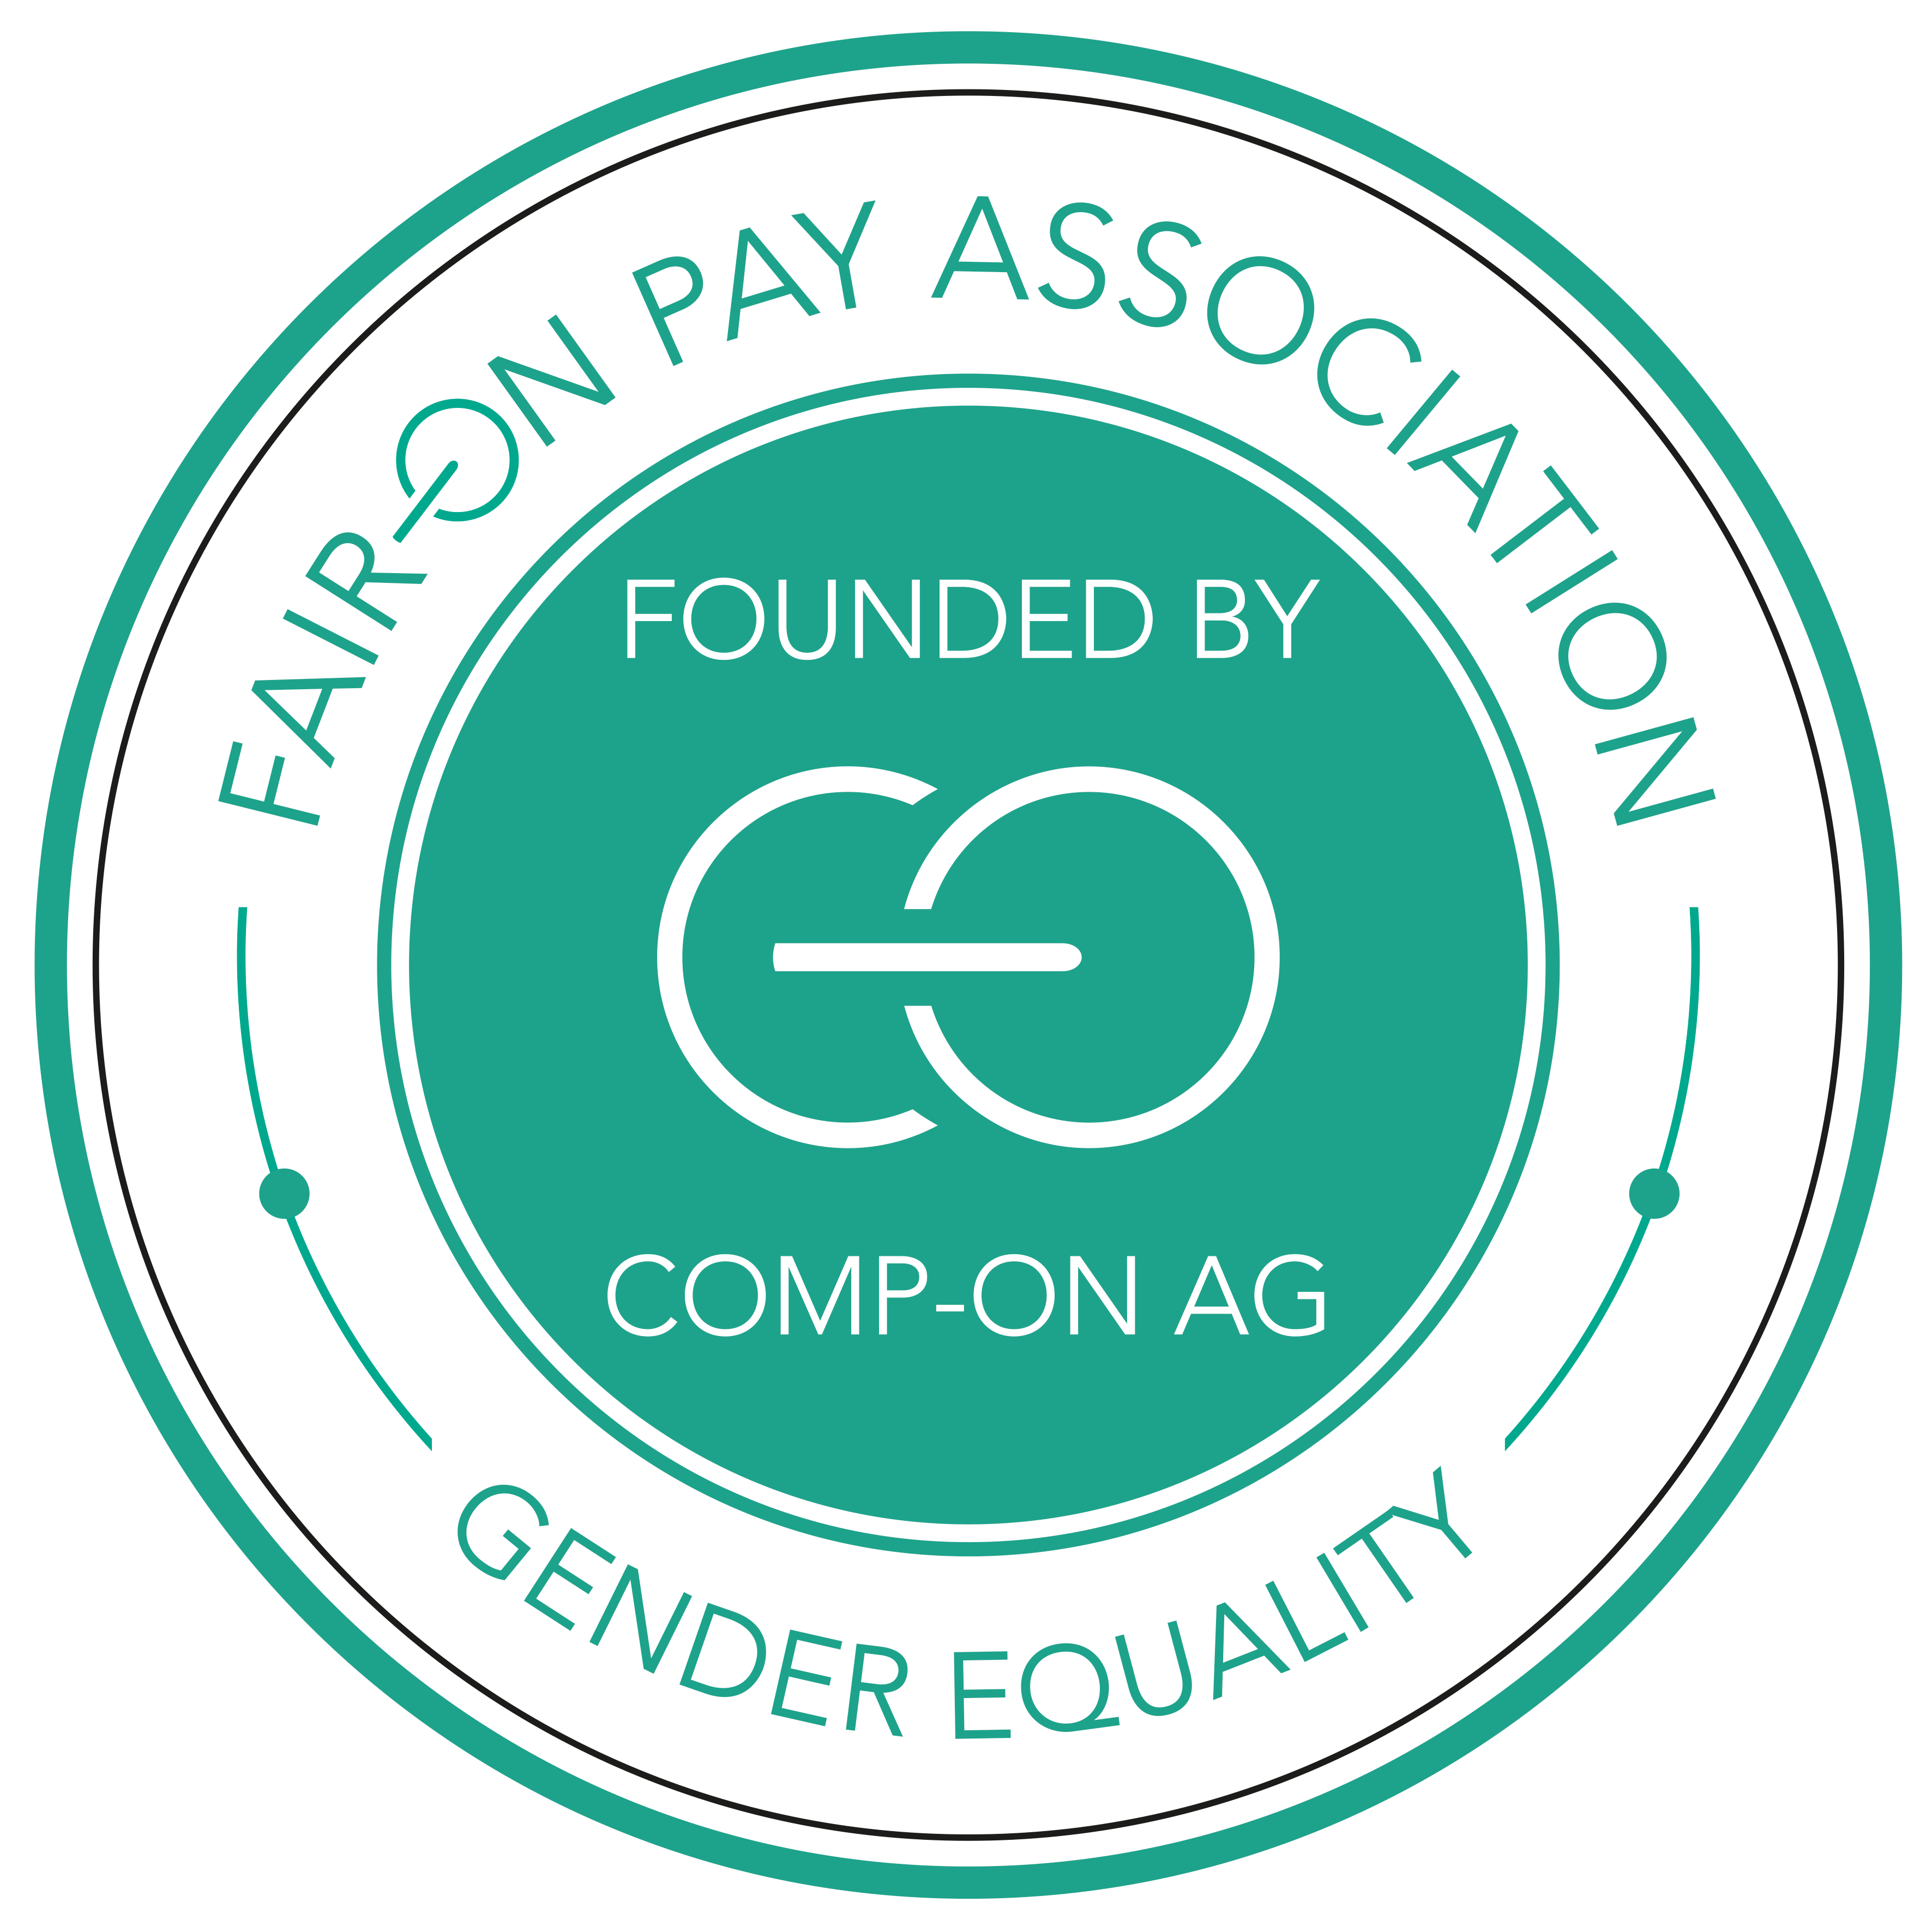 Fair-ON-Pay Gender Equality Label